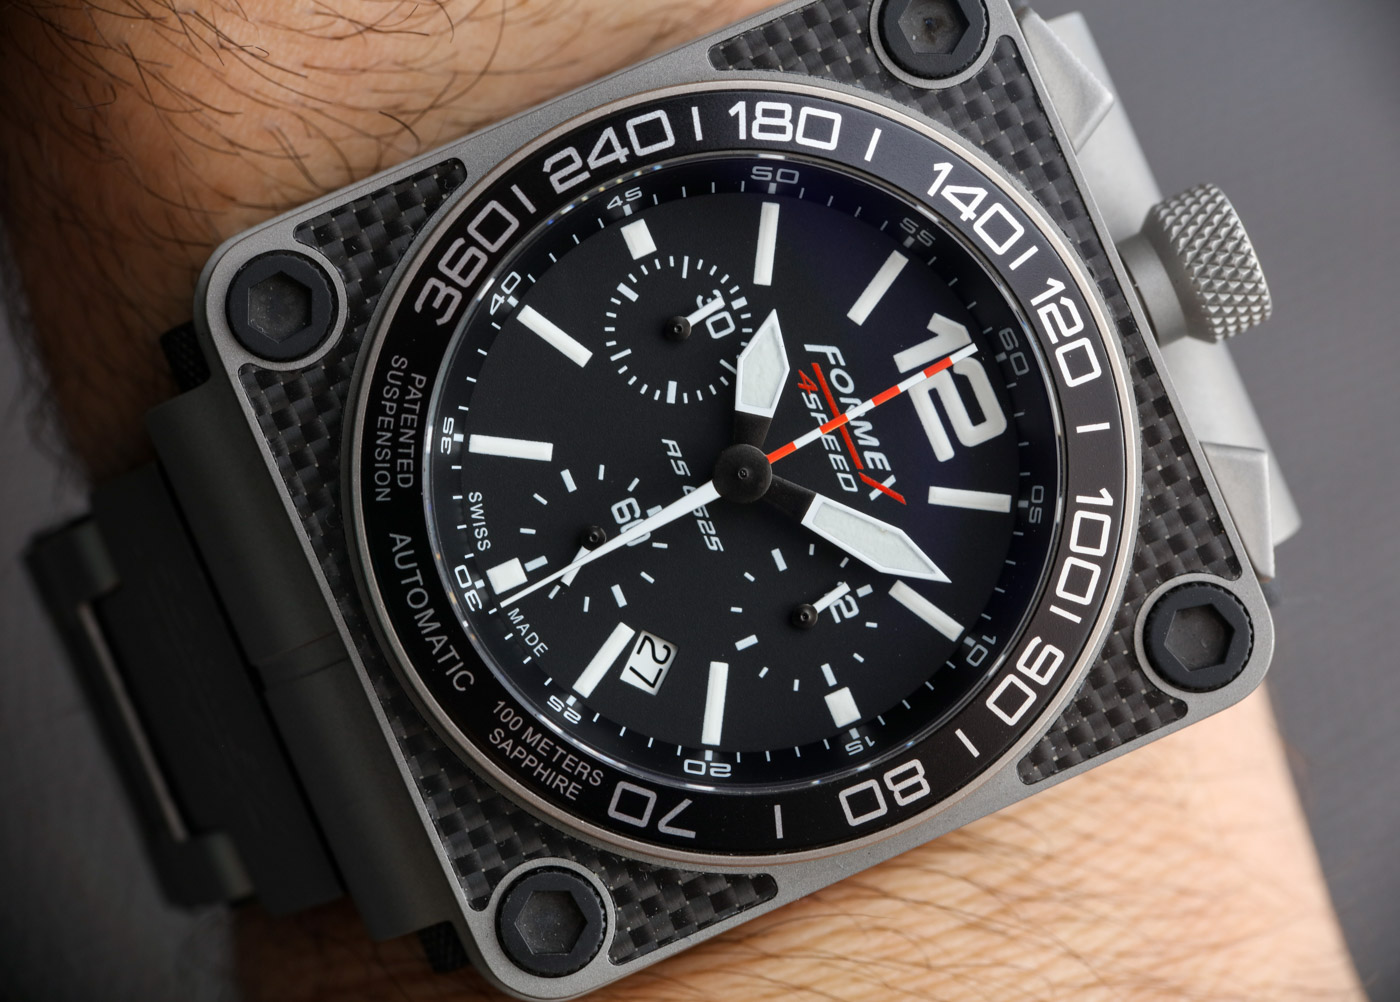 No Longer Made: Formex 4Speed RS 6525 Chronograph Watch Hands-On